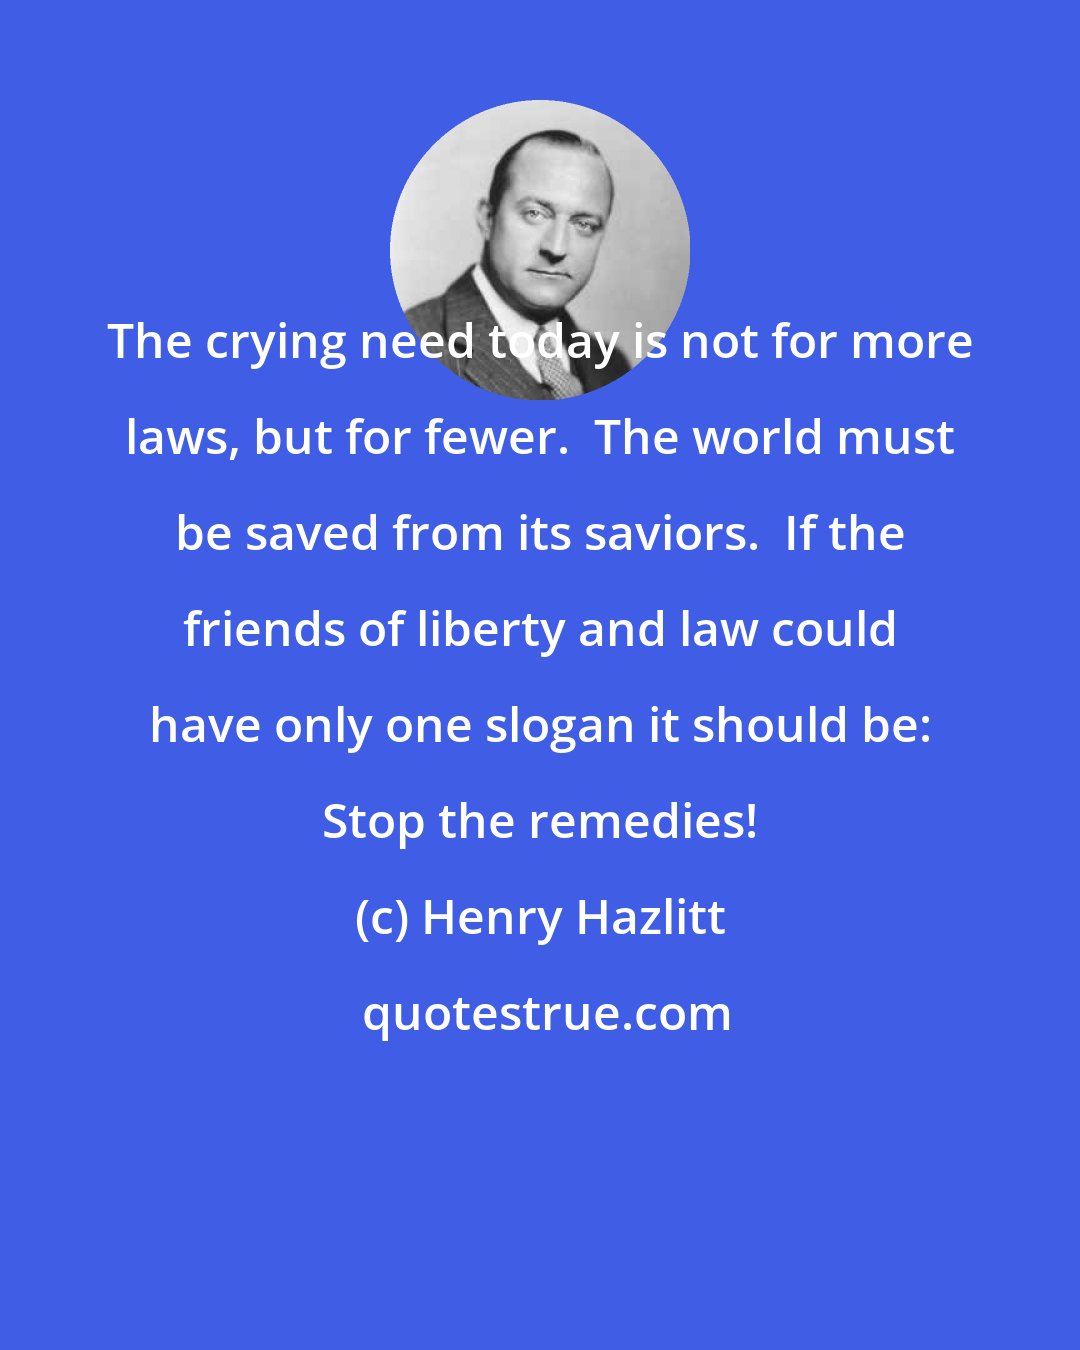 Henry Hazlitt: The crying need today is not for more laws, but for fewer.  The world must be saved from its saviors.  If the friends of liberty and law could have only one slogan it should be: Stop the remedies!